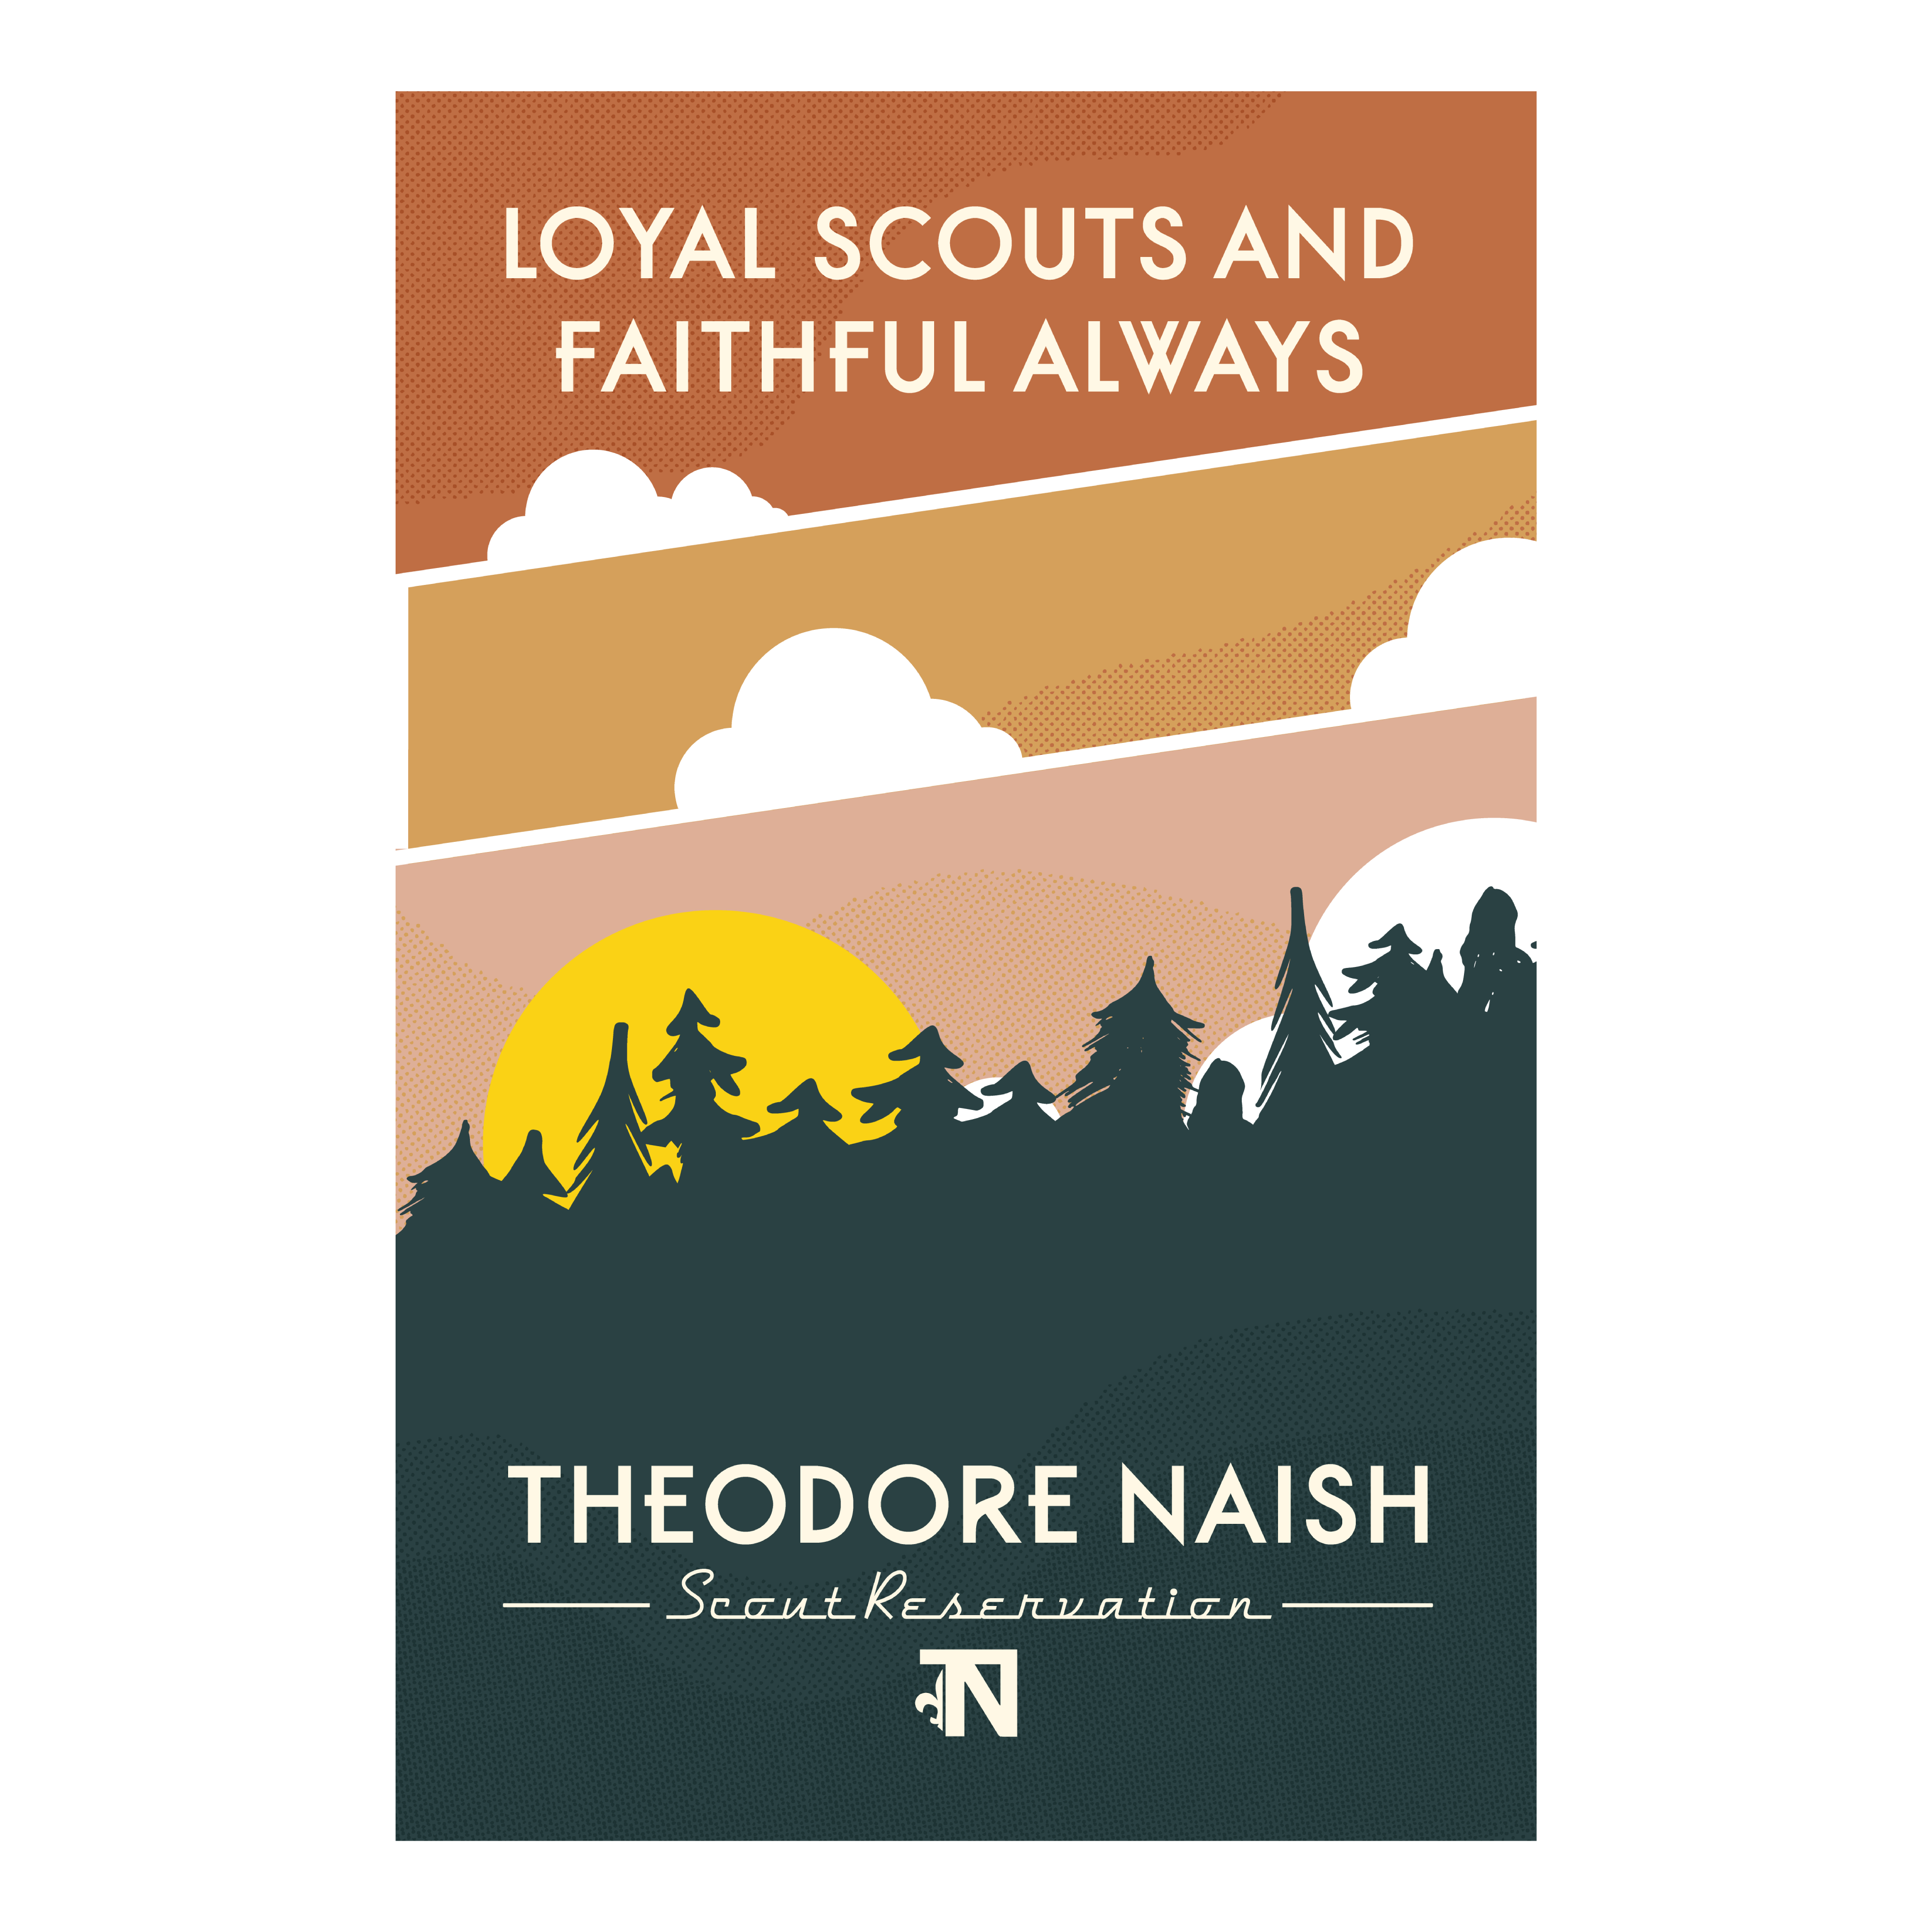 boy-scouts-of-america-theodore-naish-scout-reservation-poster